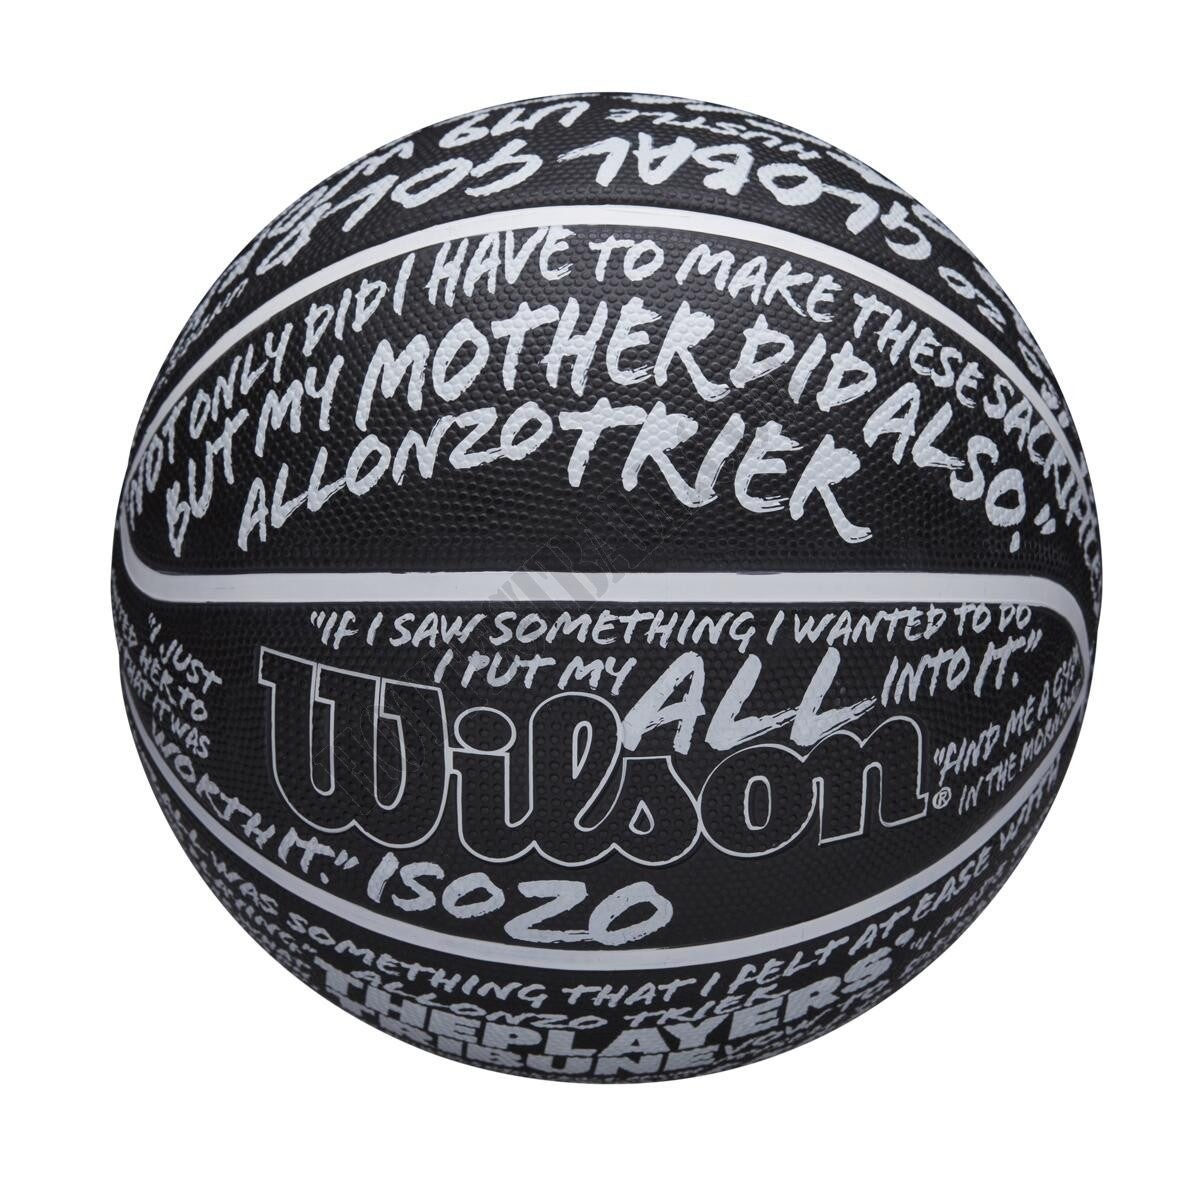 ISO Zo x The Players' Tribune Limited Edition Basketball - Wilson Discount Store - -8